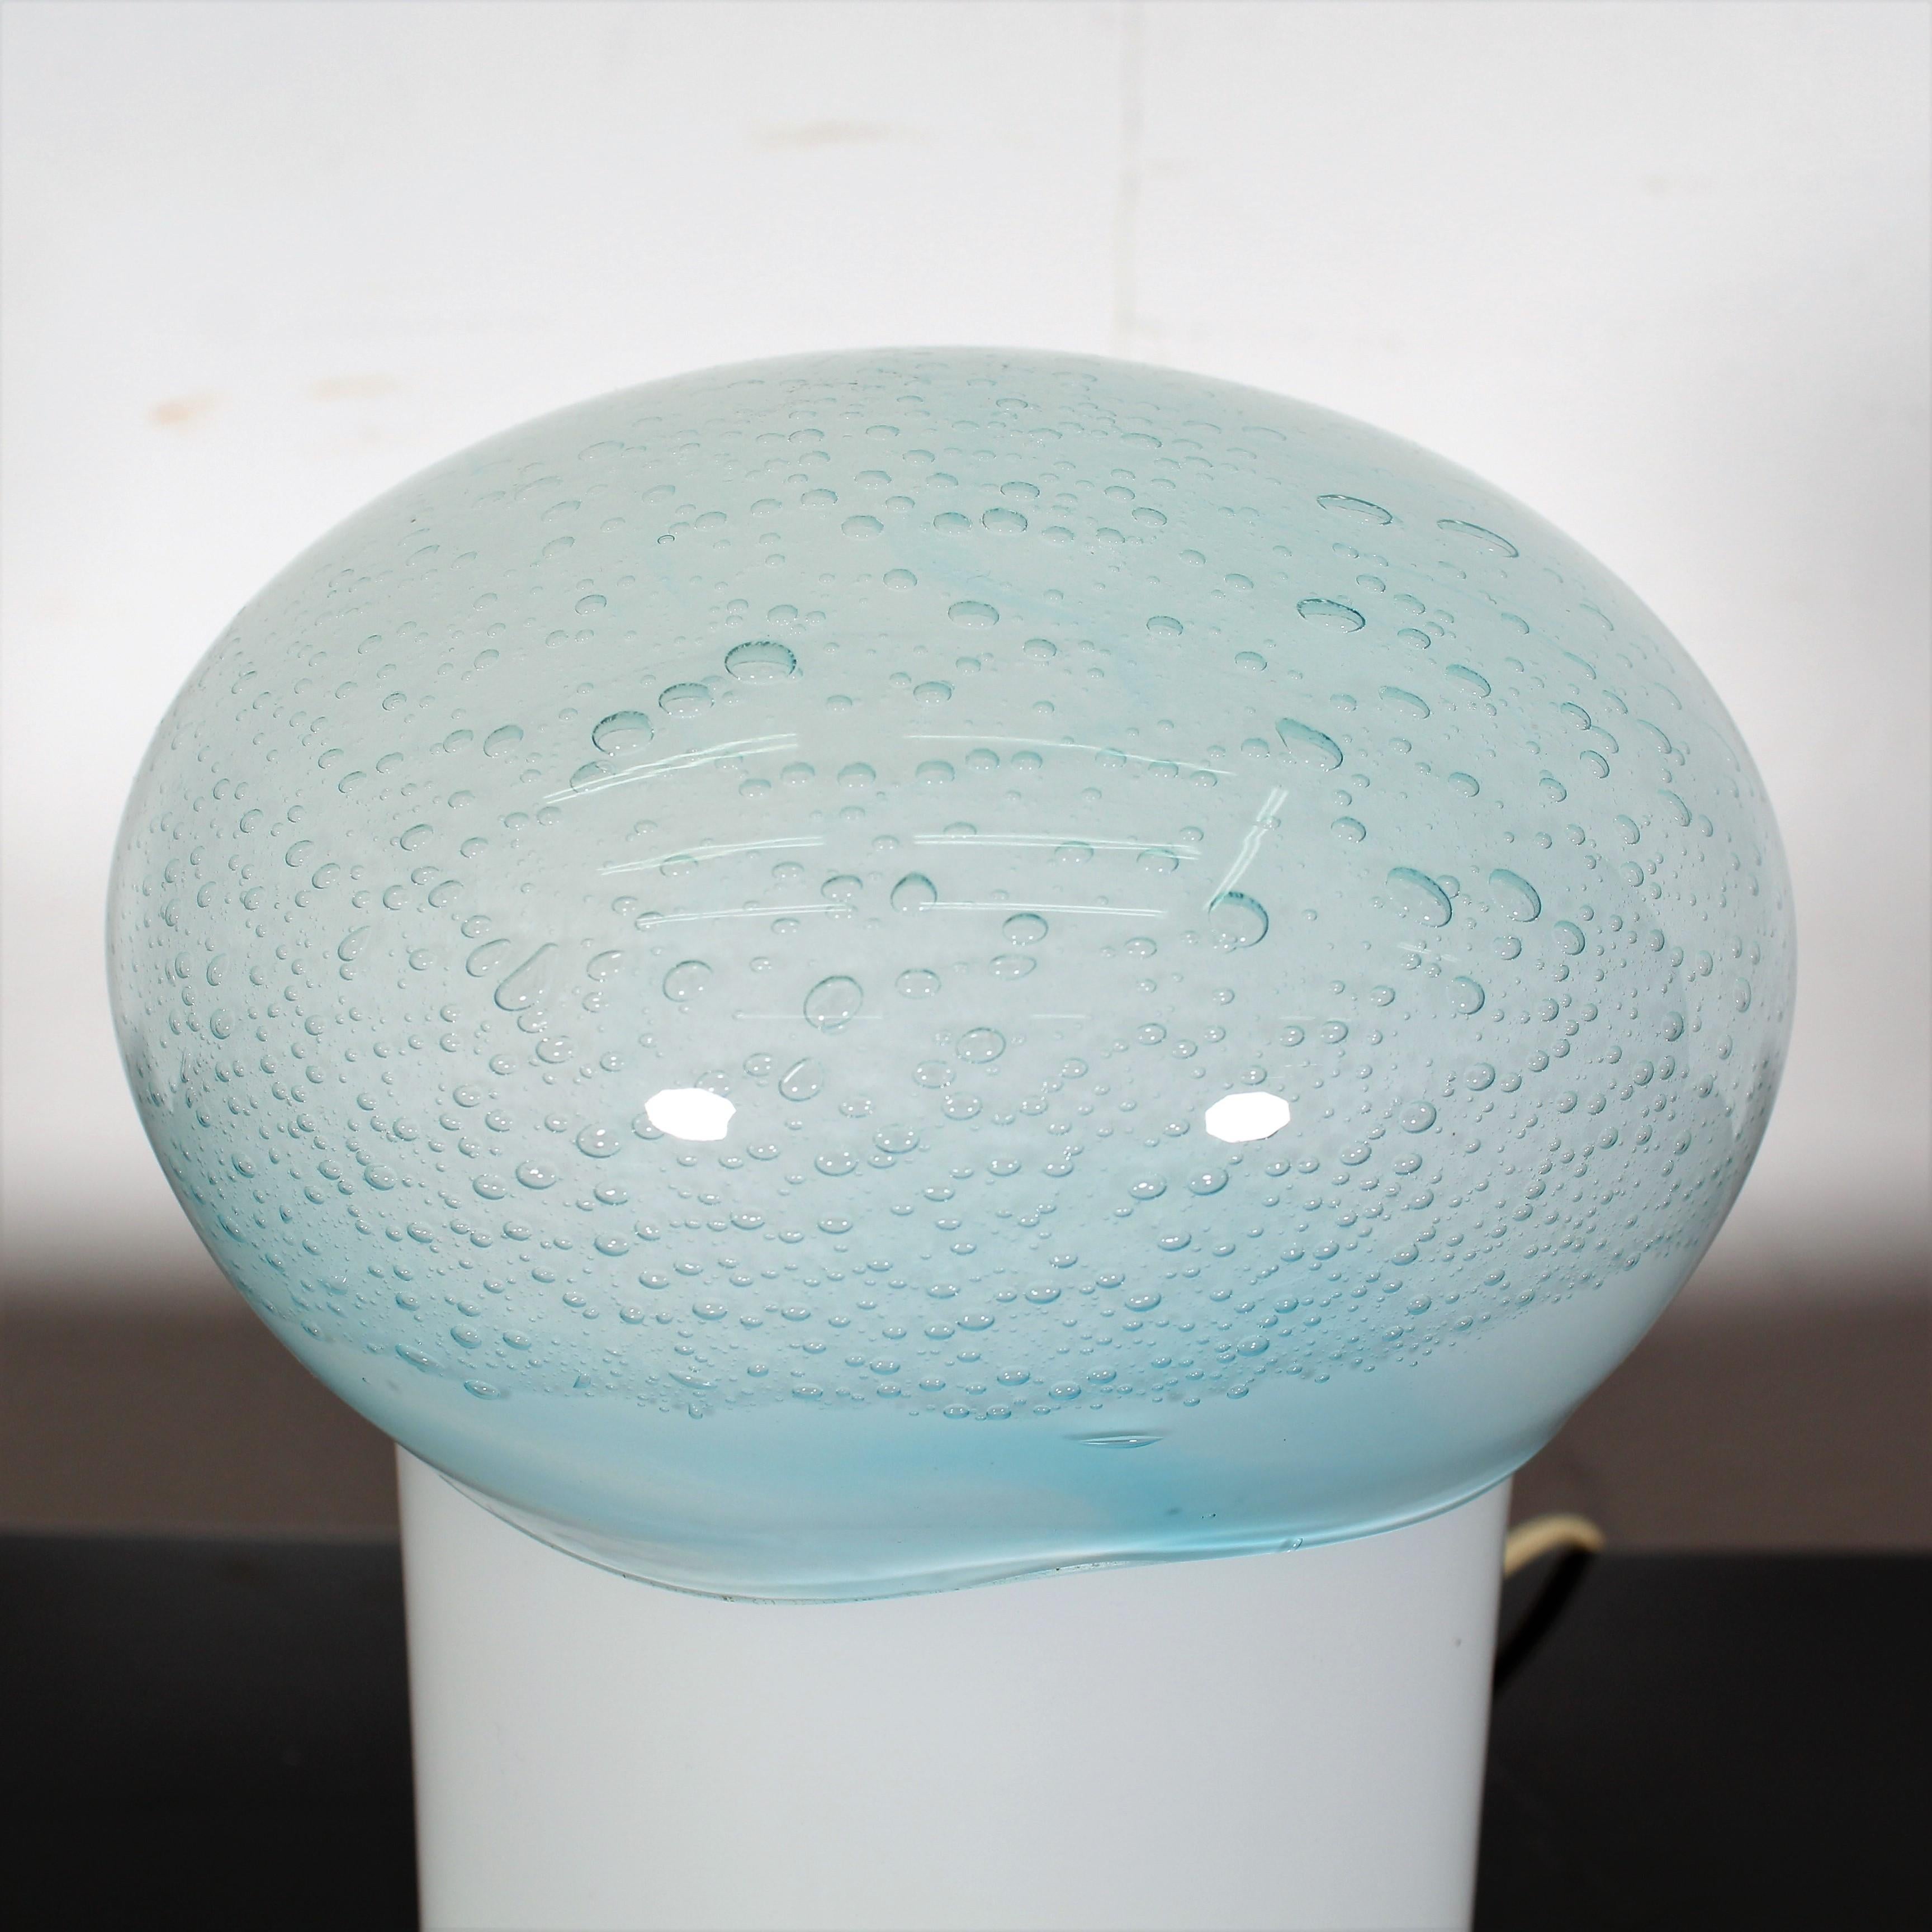 Reflecting the simplicity of vintage design, mushroom table lamp has high-quality glass and a unique character that complements its handmade production. Glass color tone in glossy white and blue. Designed by Carlo Nason for mazzega, circa 1965 in